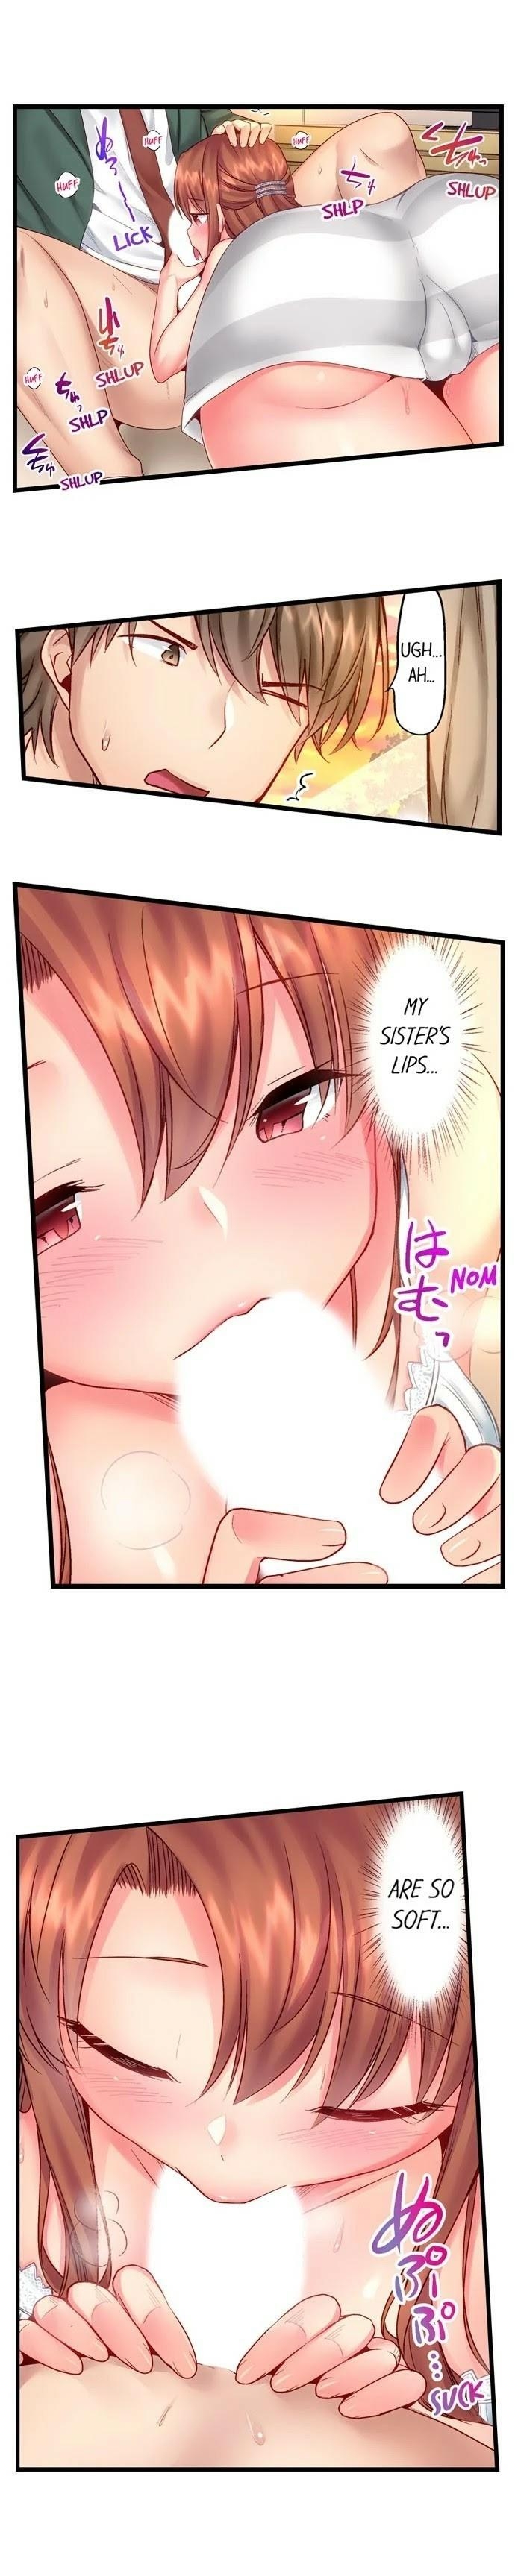 [Yuuki HB] "Hypnotized" Sex with My Brother Ch.21/? [English] [Ongoing] 61